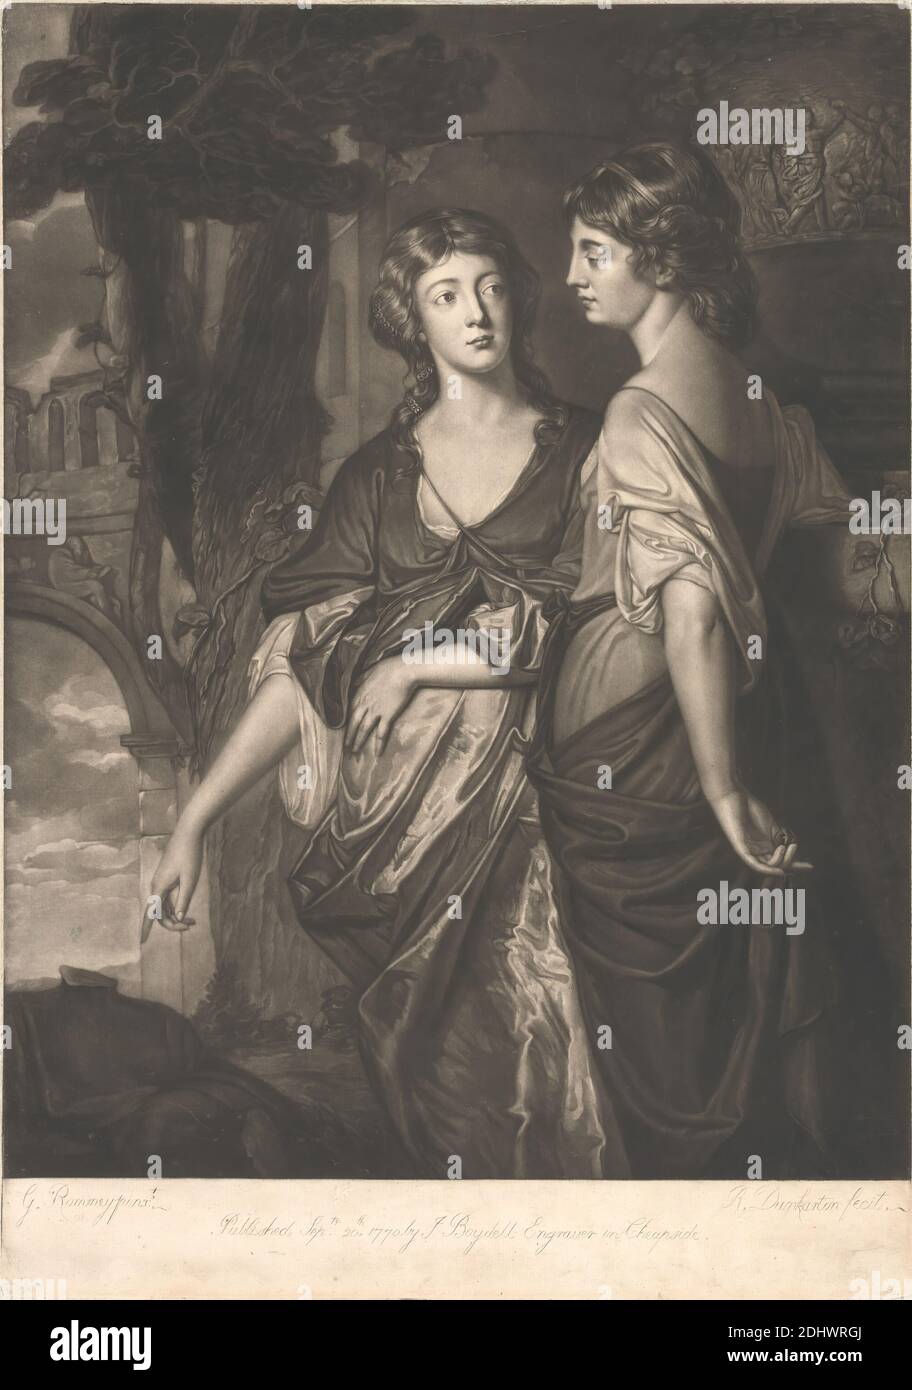 Sisters Contemplating on Mortality, Print made by Robert Dunkarton, 1744–1811, British, after George Romney, 1734–1802, British, 1770, Mezzotint (first state) on medium, slightly textured, cream laid paper, Sheet: 20 × 14 1/4 inches (50.8 × 36.2 cm), Plate: 19 7/8 × 14 inches (50.5 × 35.6 cm), and Image: 18 × 14 inches (45.7 × 35.6 cm), arch, clouds, contemplation, dresses, low-relief sculpture, Mortality, Extinction of Life, pointing, religious and mythological subject, ruins, silk (textile), skirts, sky, standing, statue, tree, vines, women Stock Photo